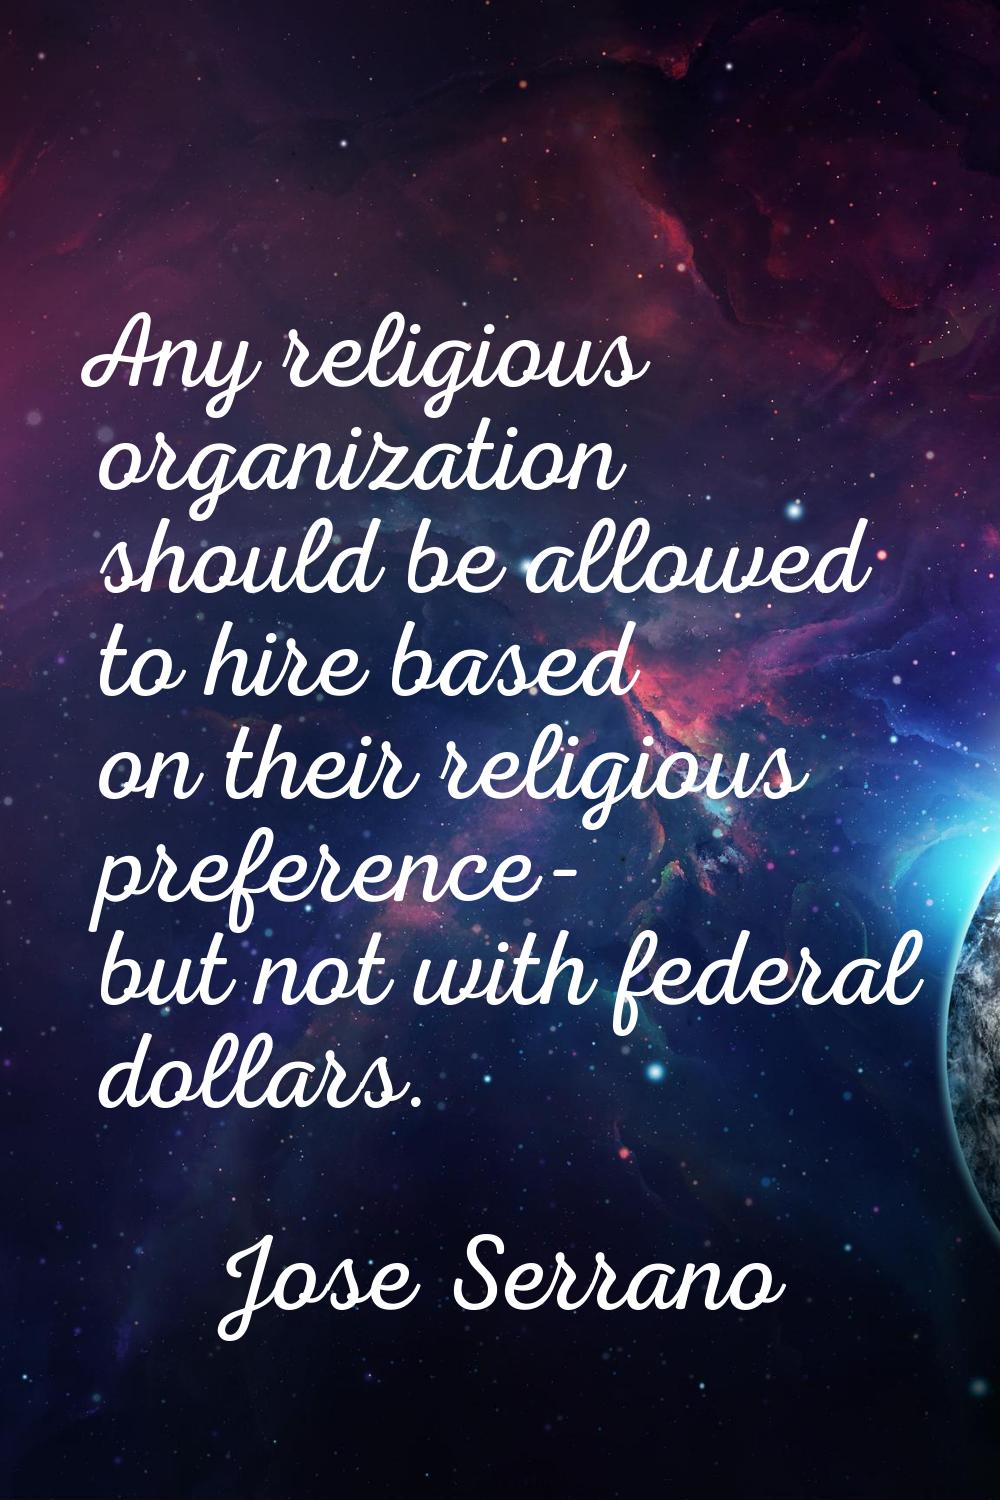 Any religious organization should be allowed to hire based on their religious preference- but not w